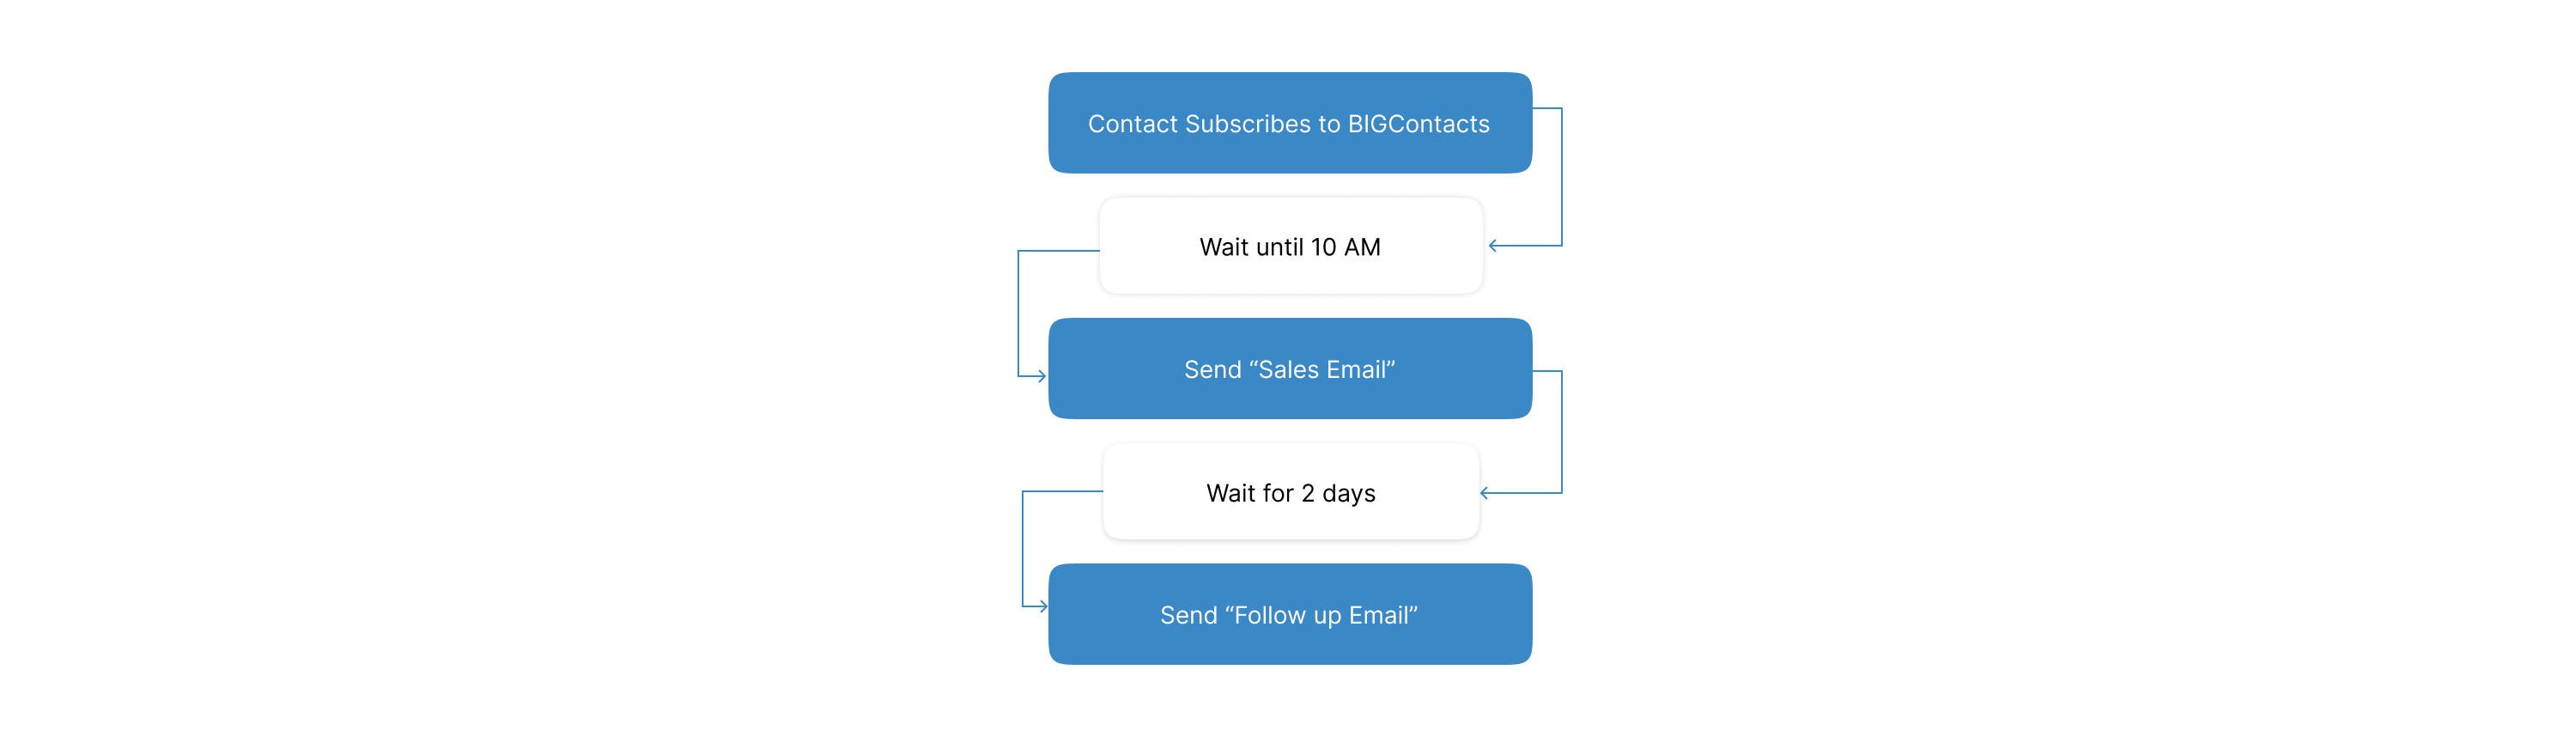 Run email campaigns to acquire cold leads